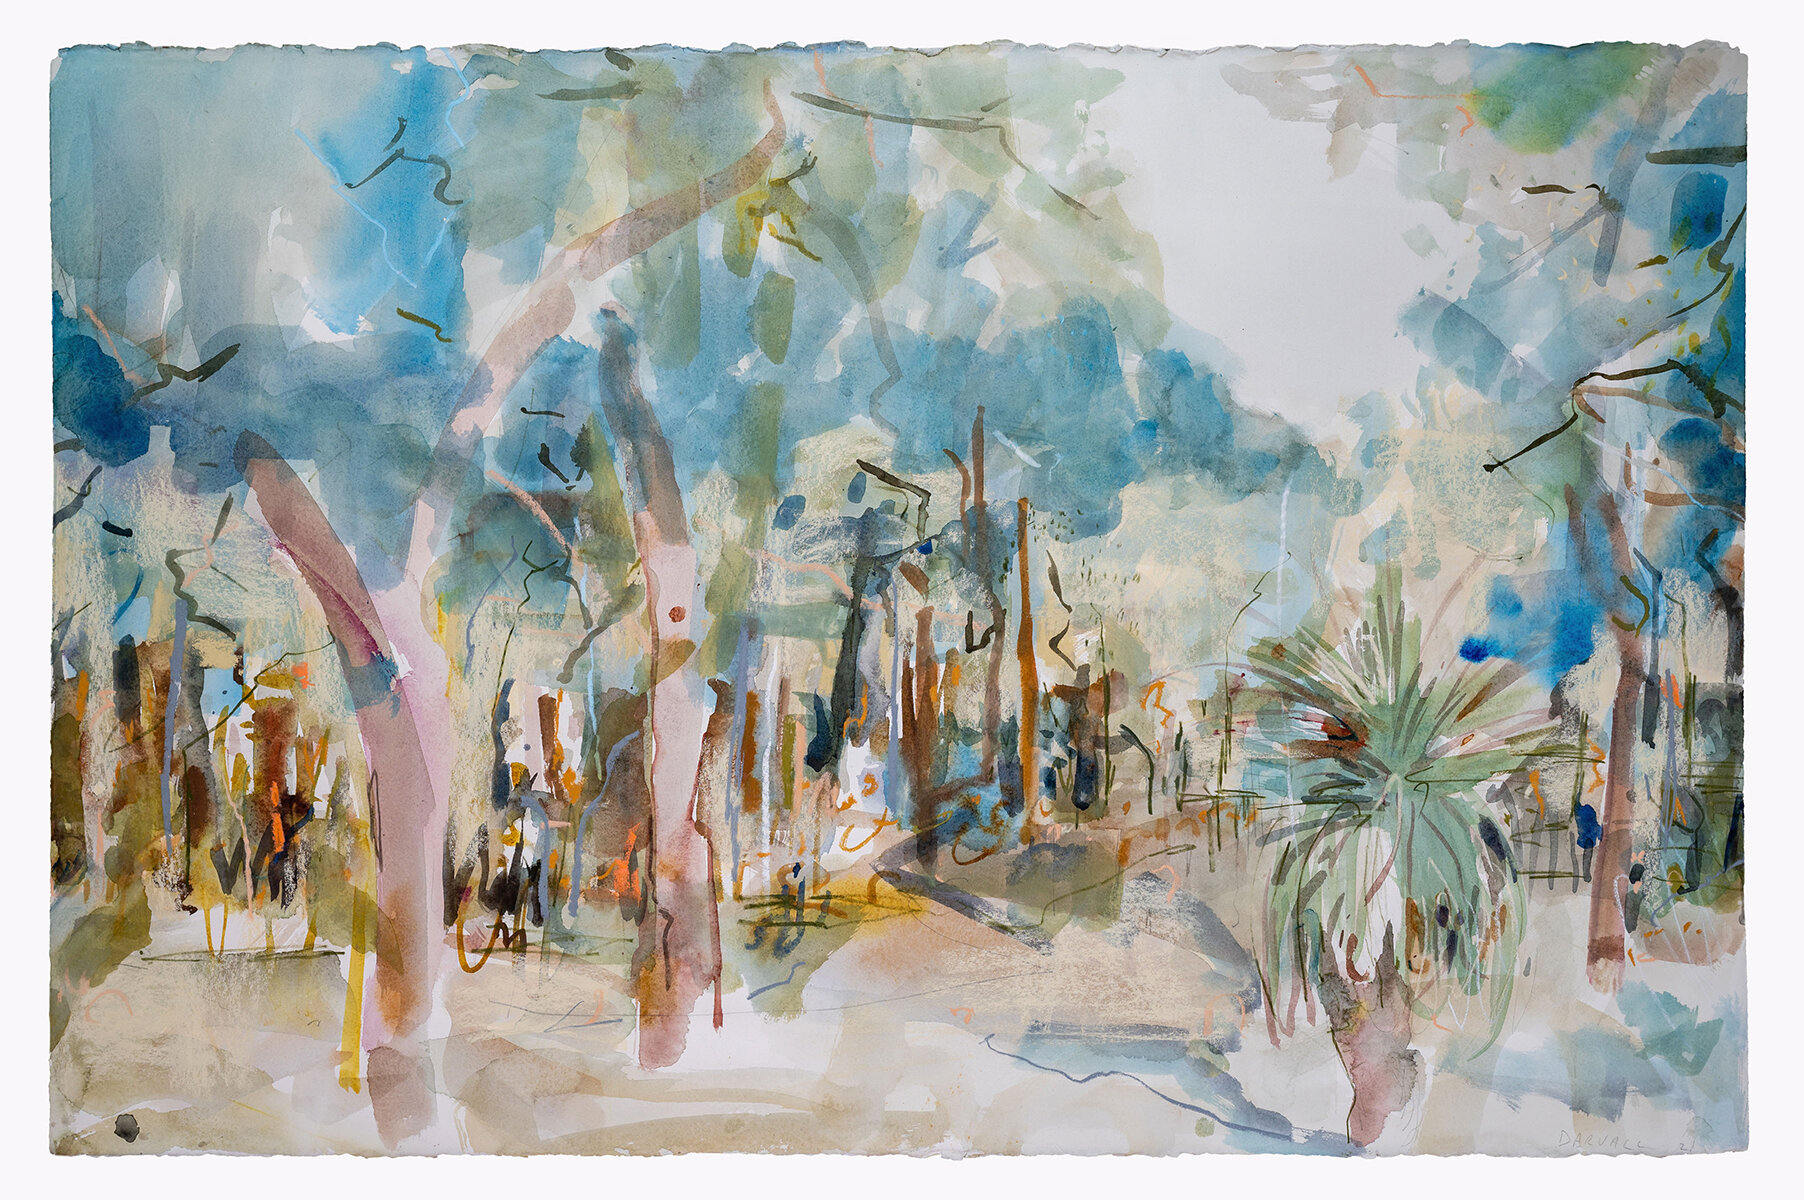   Wandoo Path,  2021  66 x 102 cm Watercolour and pastel on arches paper. Finalist York Botanic Art Prize 2021  (Private Collection) 